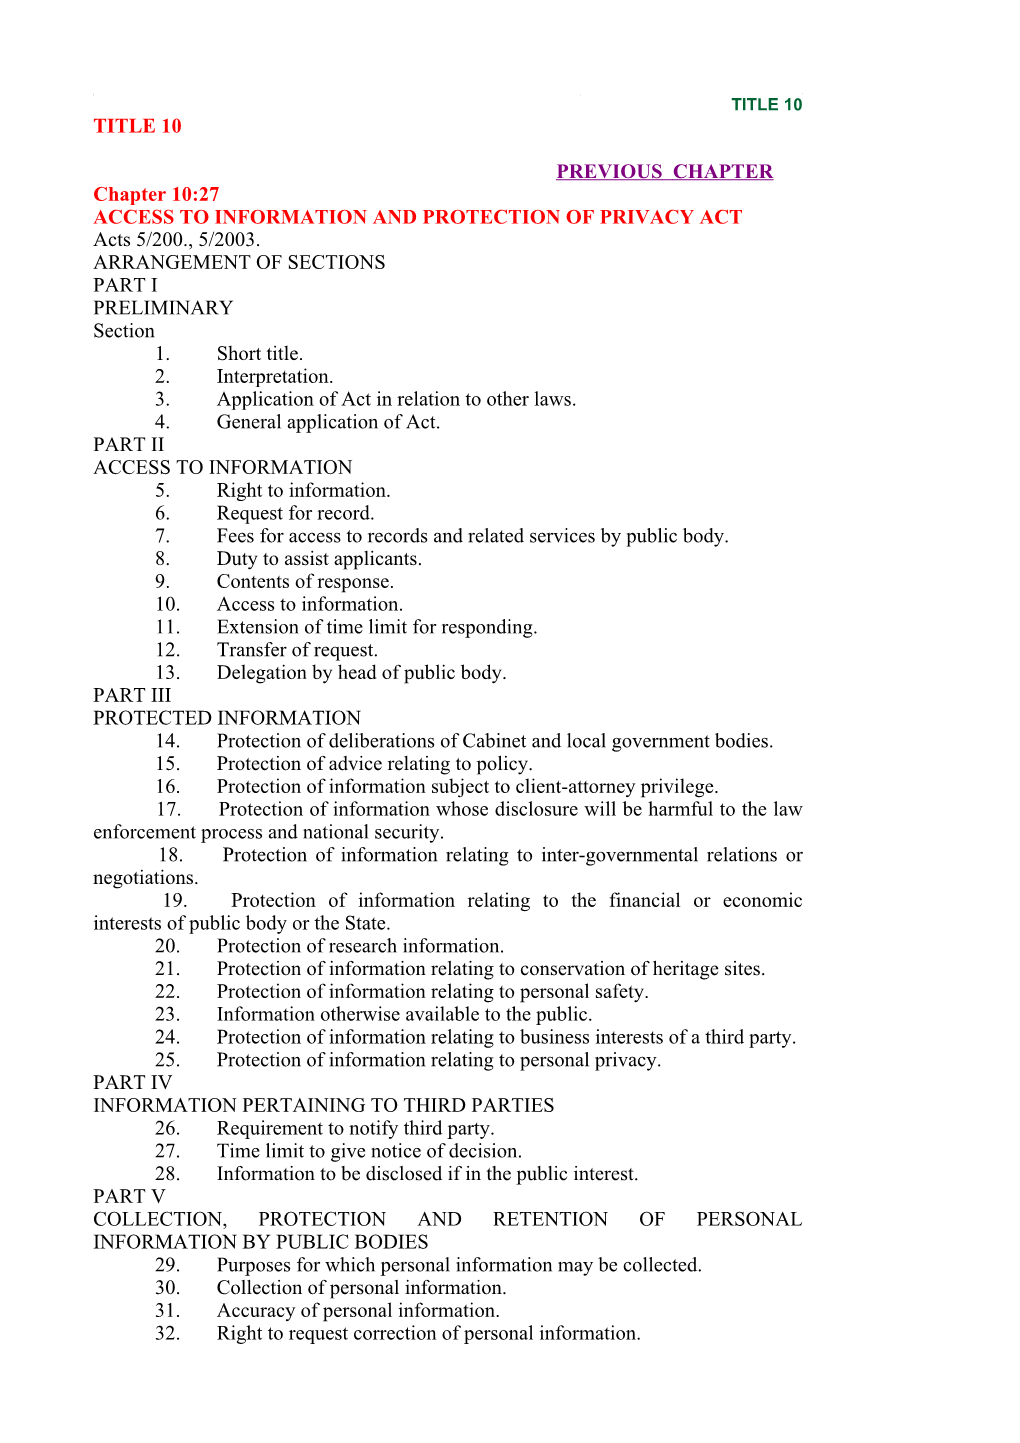 PDF of Act As Amended to Act 5/2003